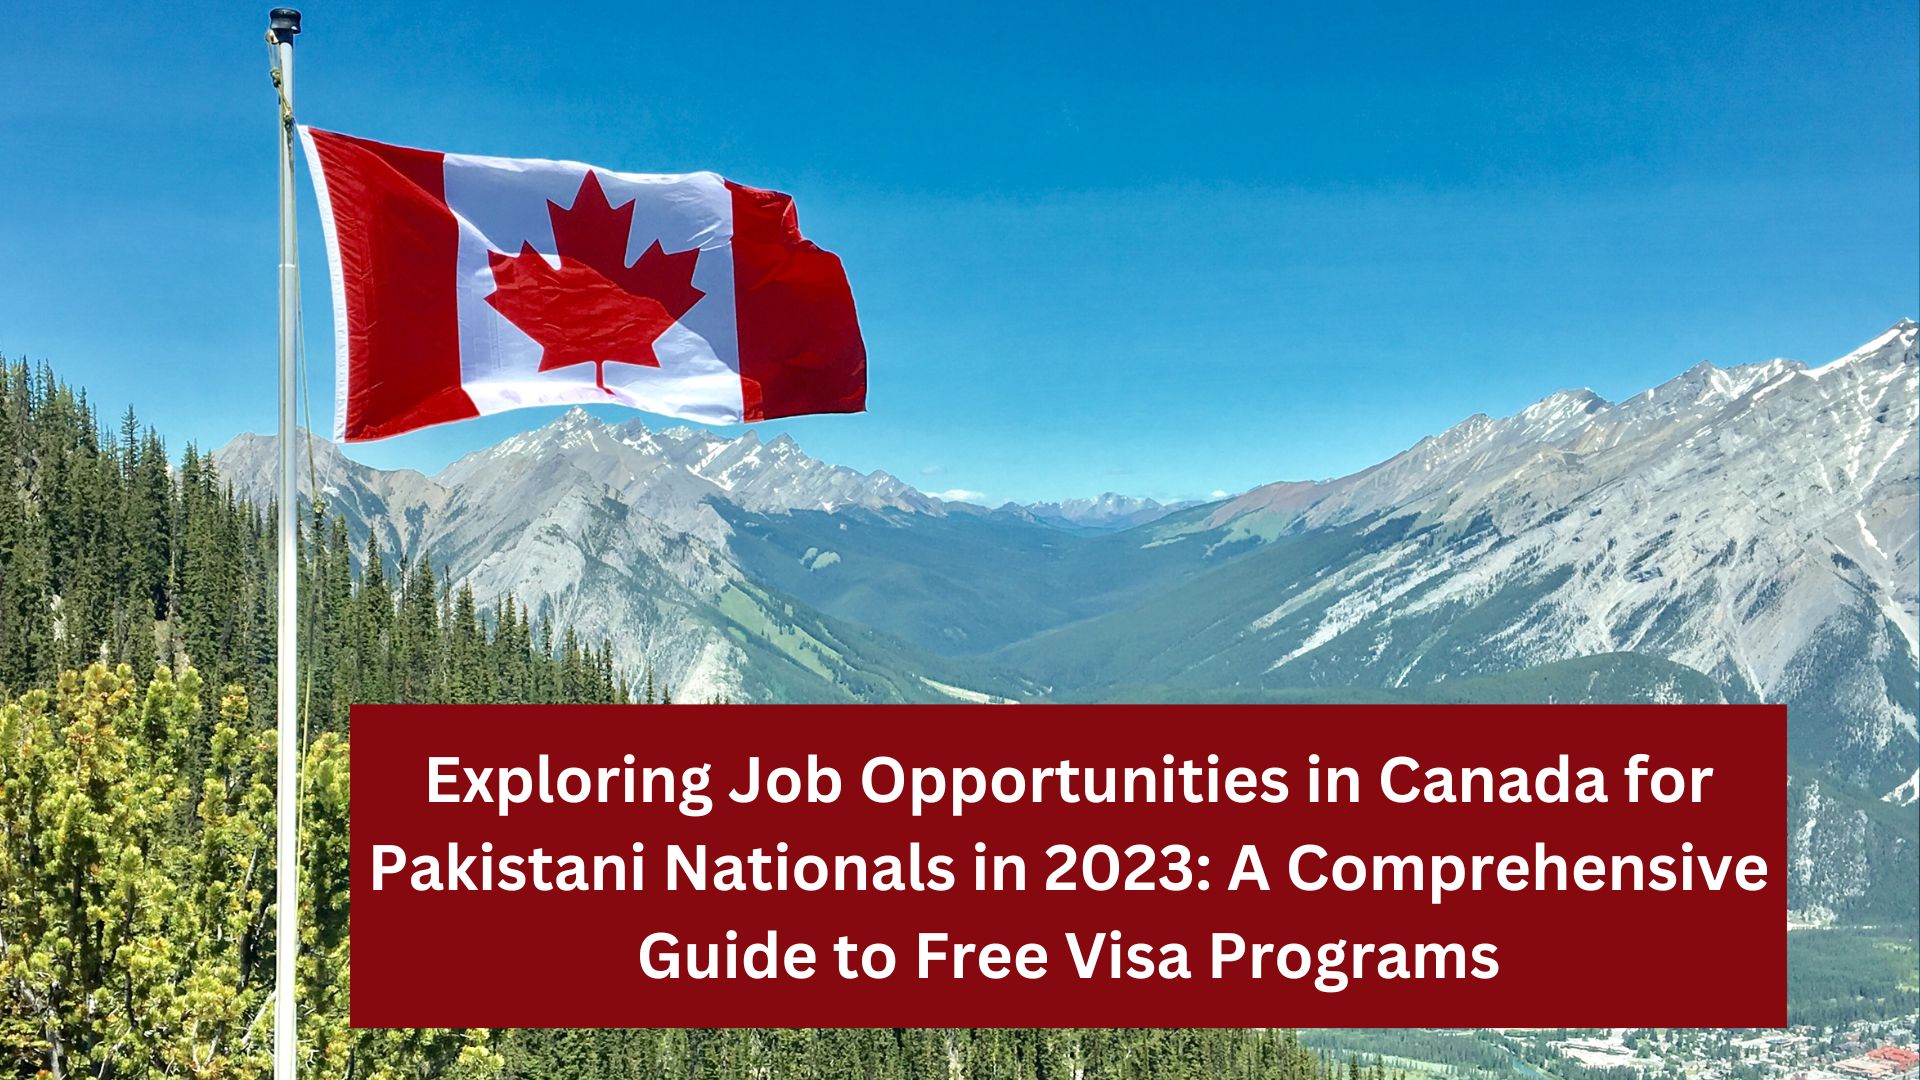 Exploring Job Opportunities in Canada for Pakistani Nationals in 2023: A Comprehensive Guide to Free Visa Programs